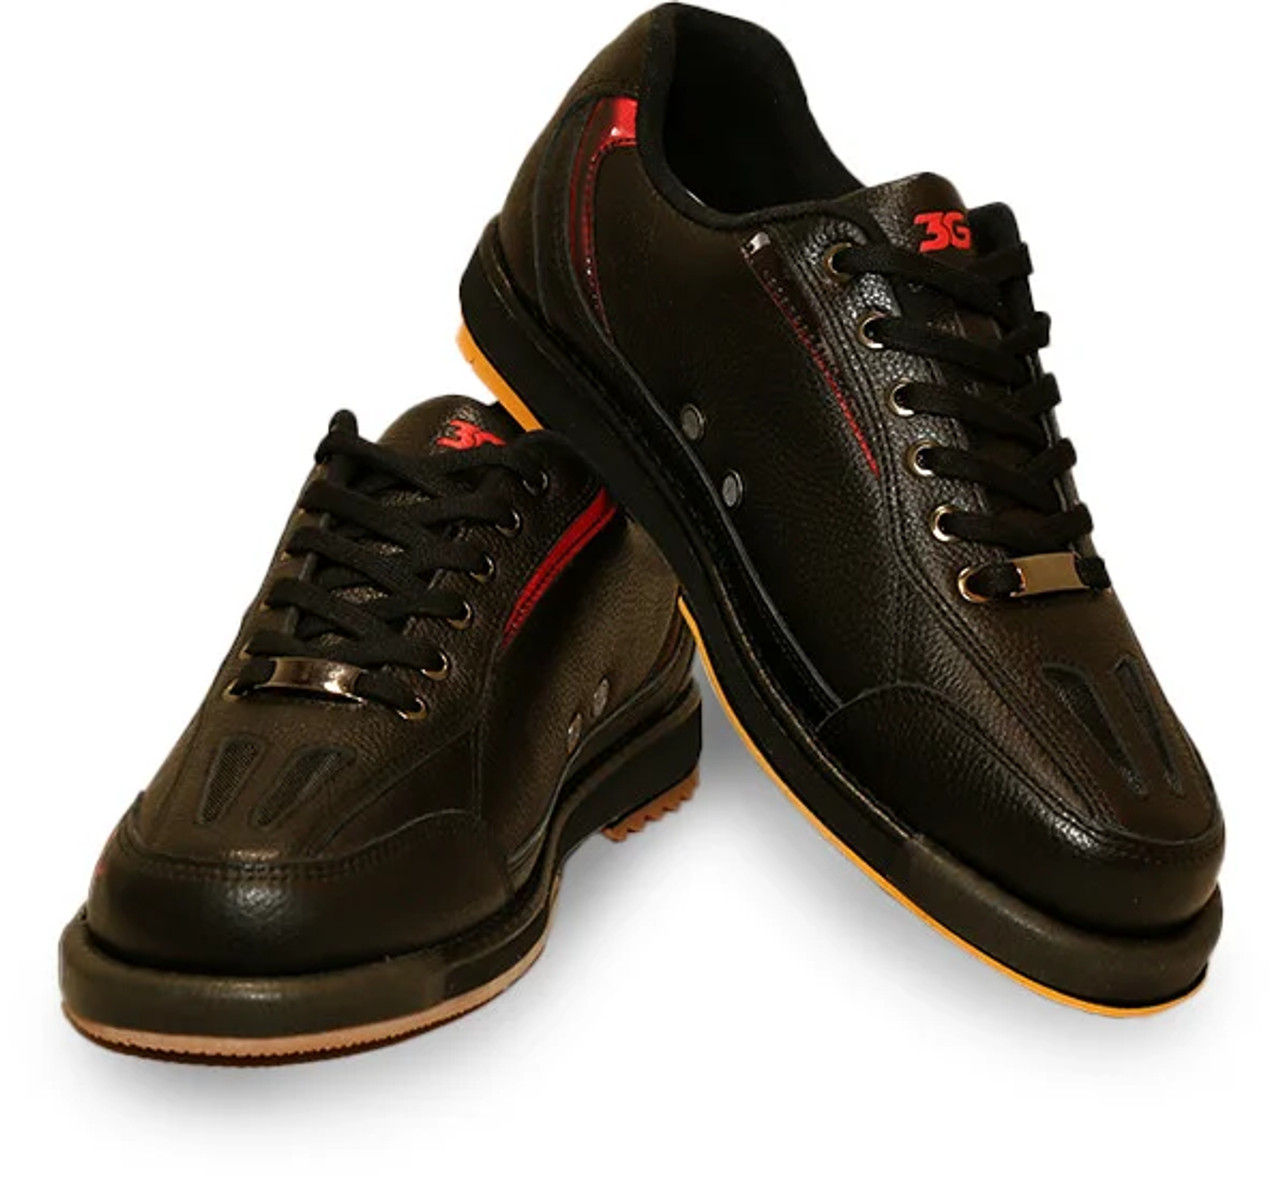 3G Racer Men's Bowling Shoes - Black/Red - Right Handed FREE SHIPPING ...